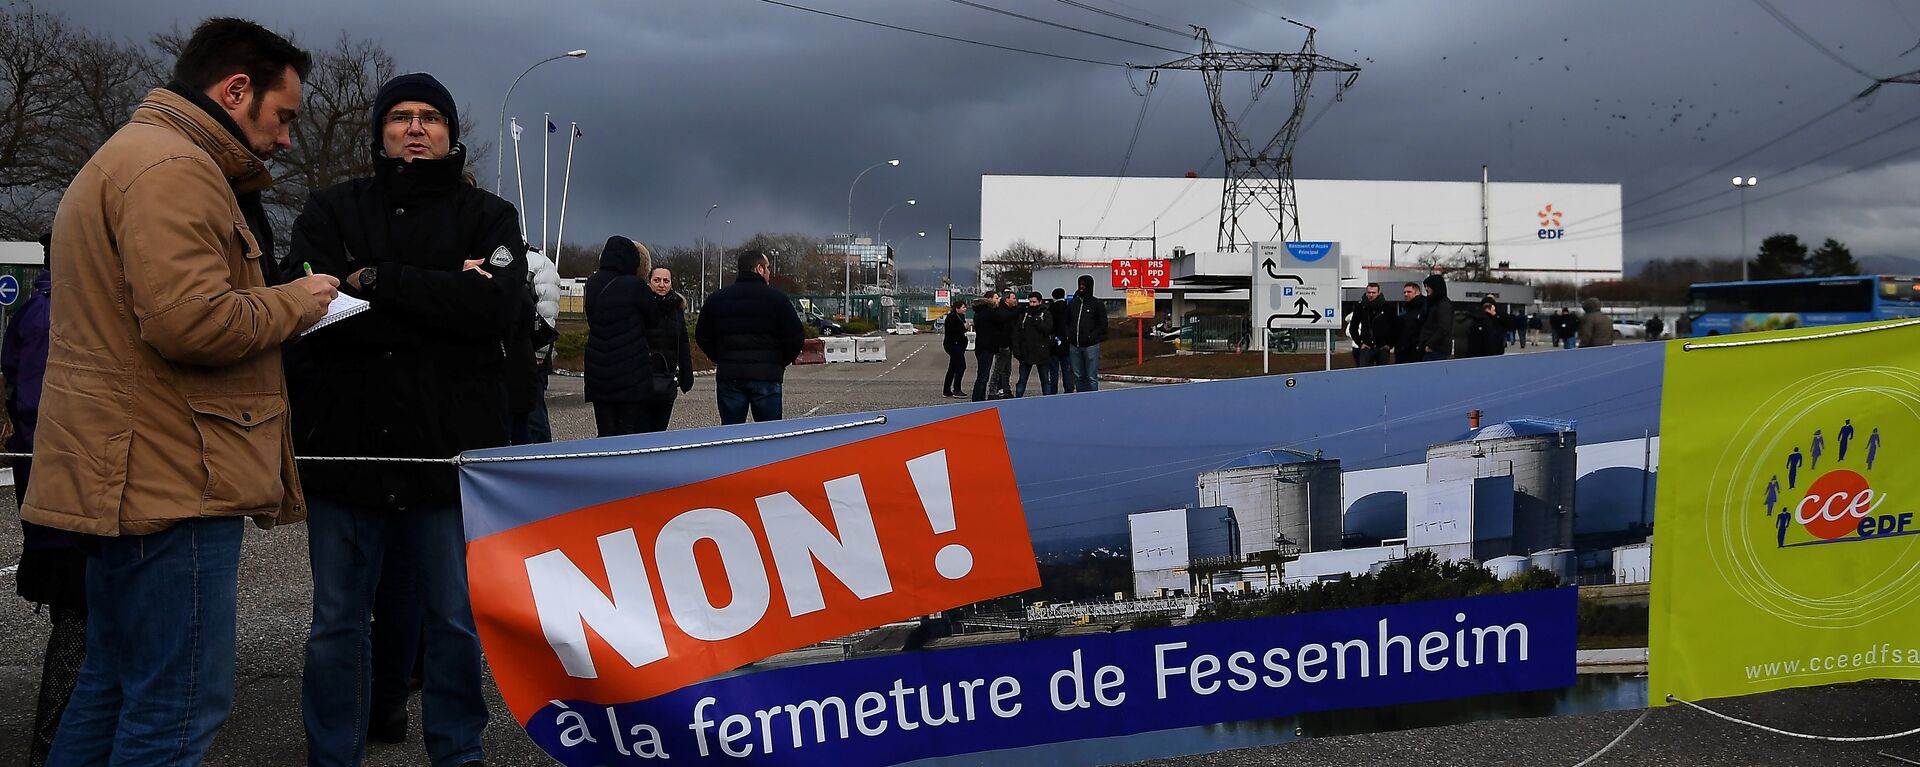 Workers demonstrate in front of the nuclear powerplant of Fessenheim, on January 19, 2018, to protest against the planned closure of plant, the country's oldest nuclear power plant - Sputnik International, 1920, 20.01.2018